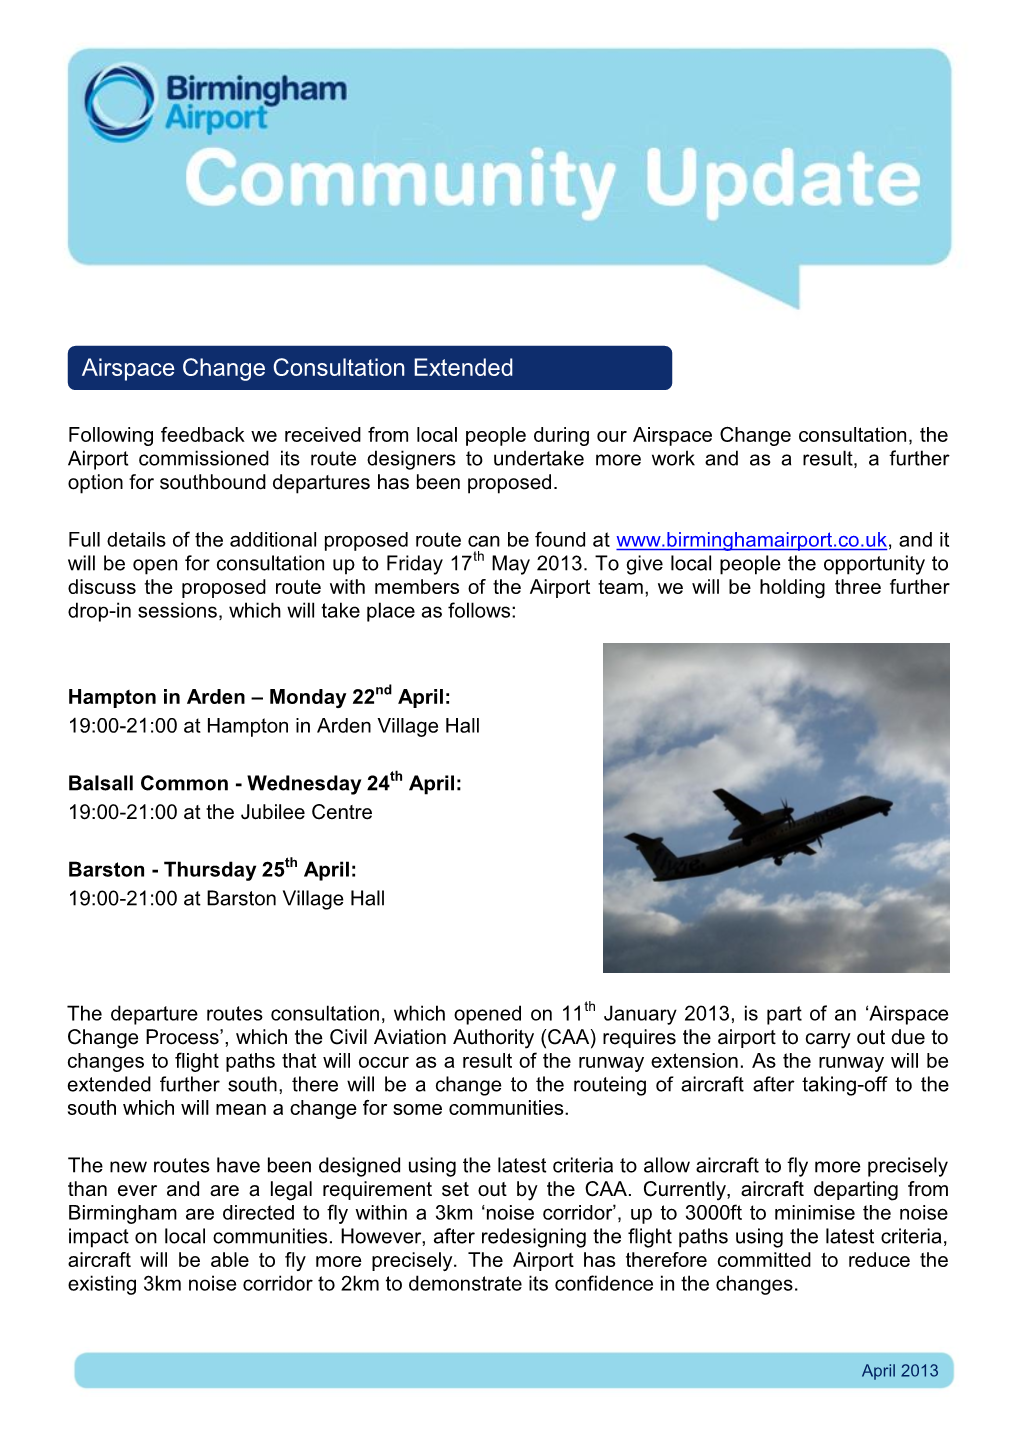 Airspace Change Consultation Extended